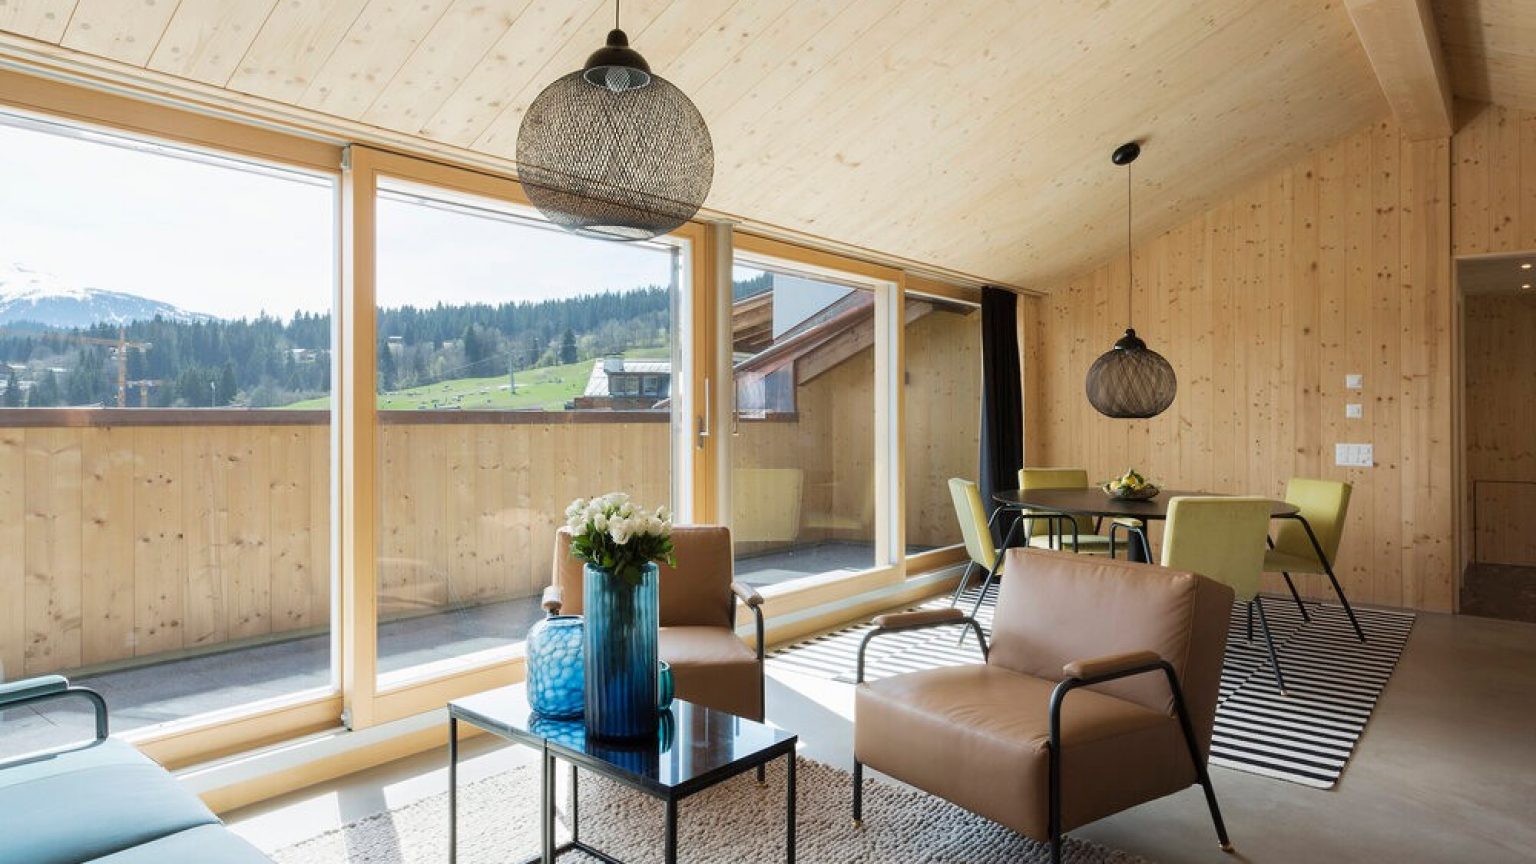 Interior design of a holiday chalet